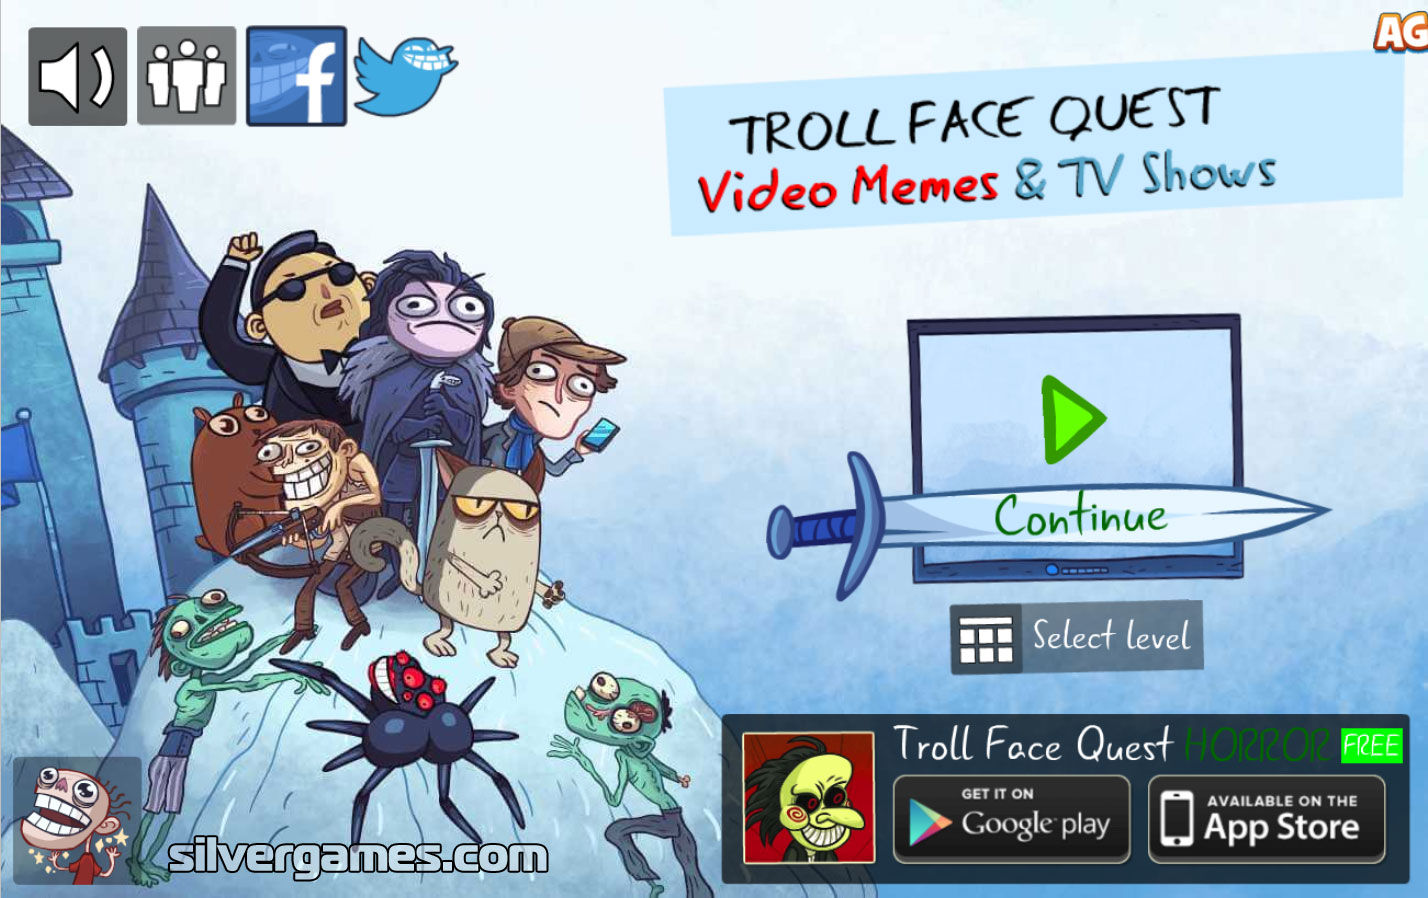 Troll Face Quest Horror – Apps no Google Play